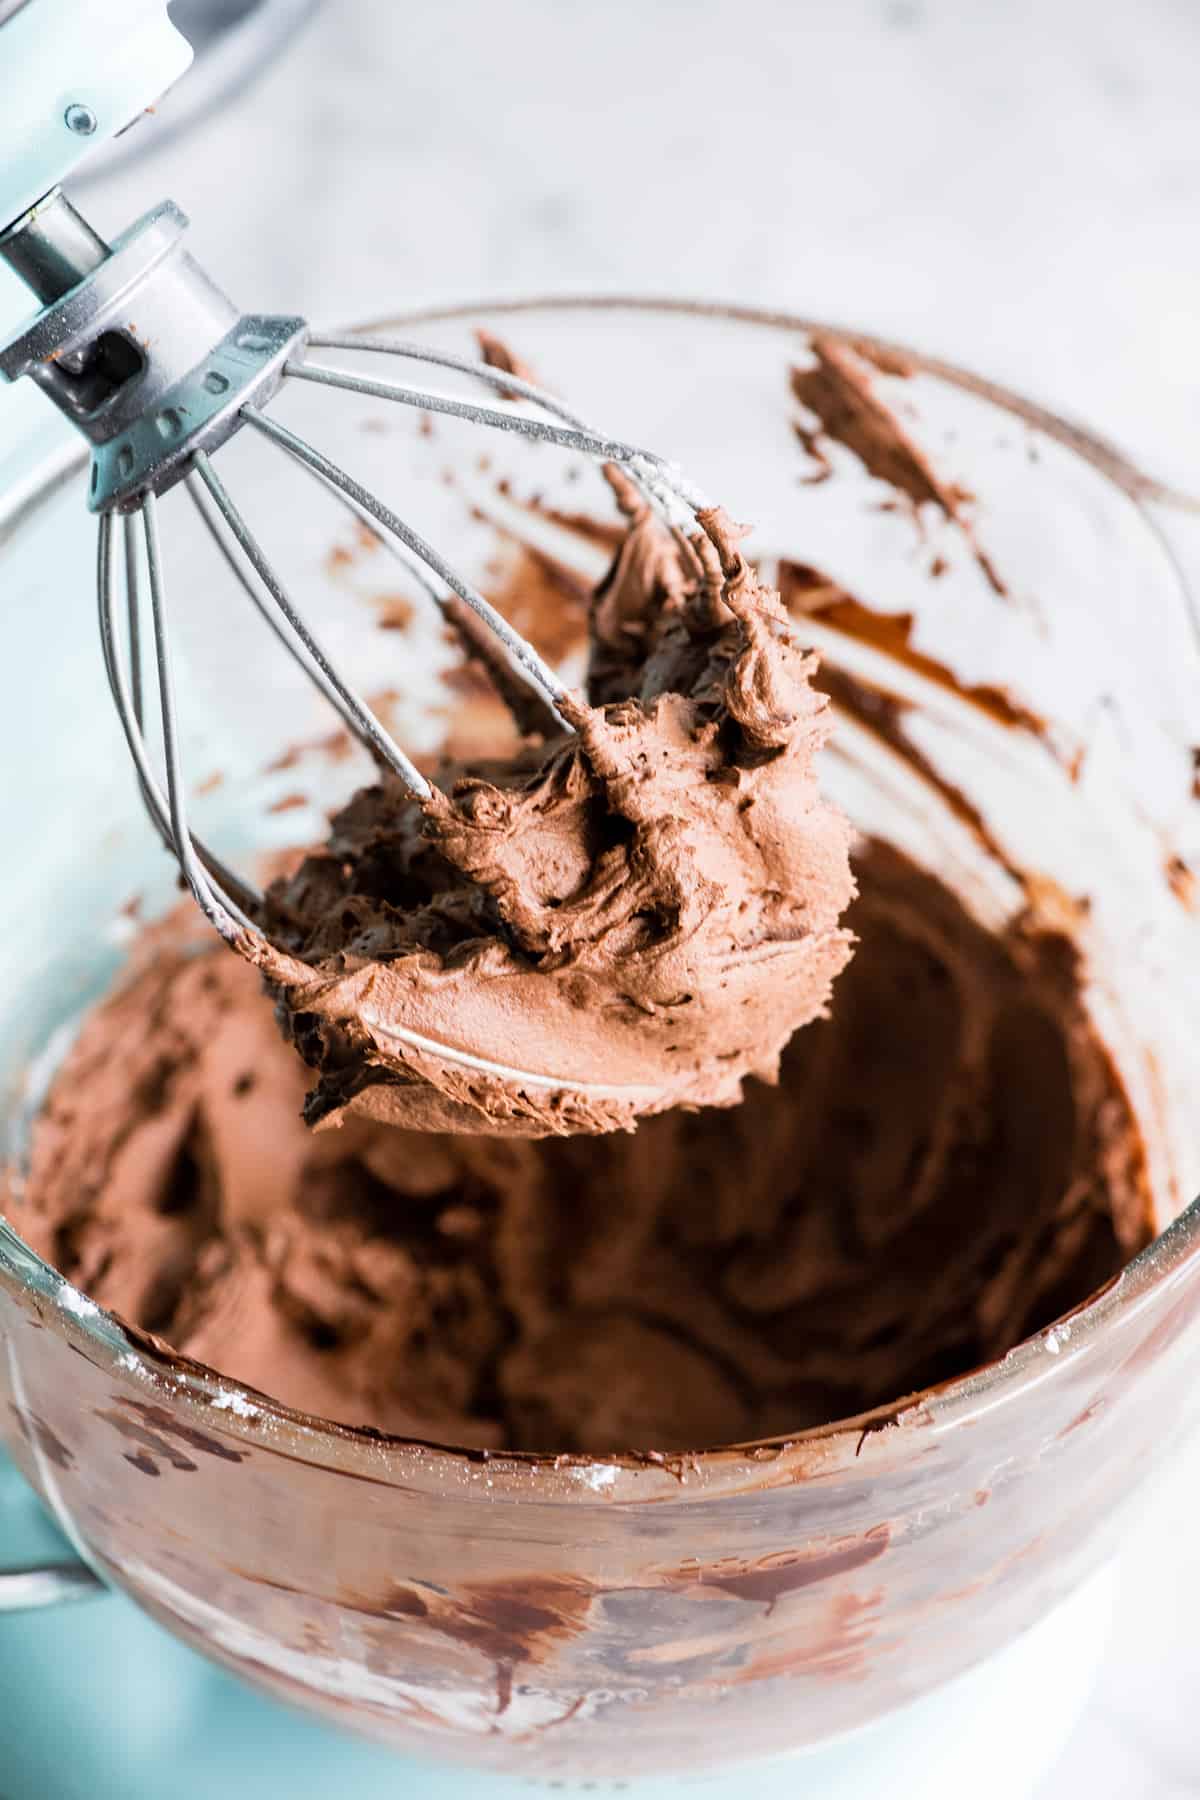 up close view of chocolate frosting on a wire whisk beater over a mixing bowl